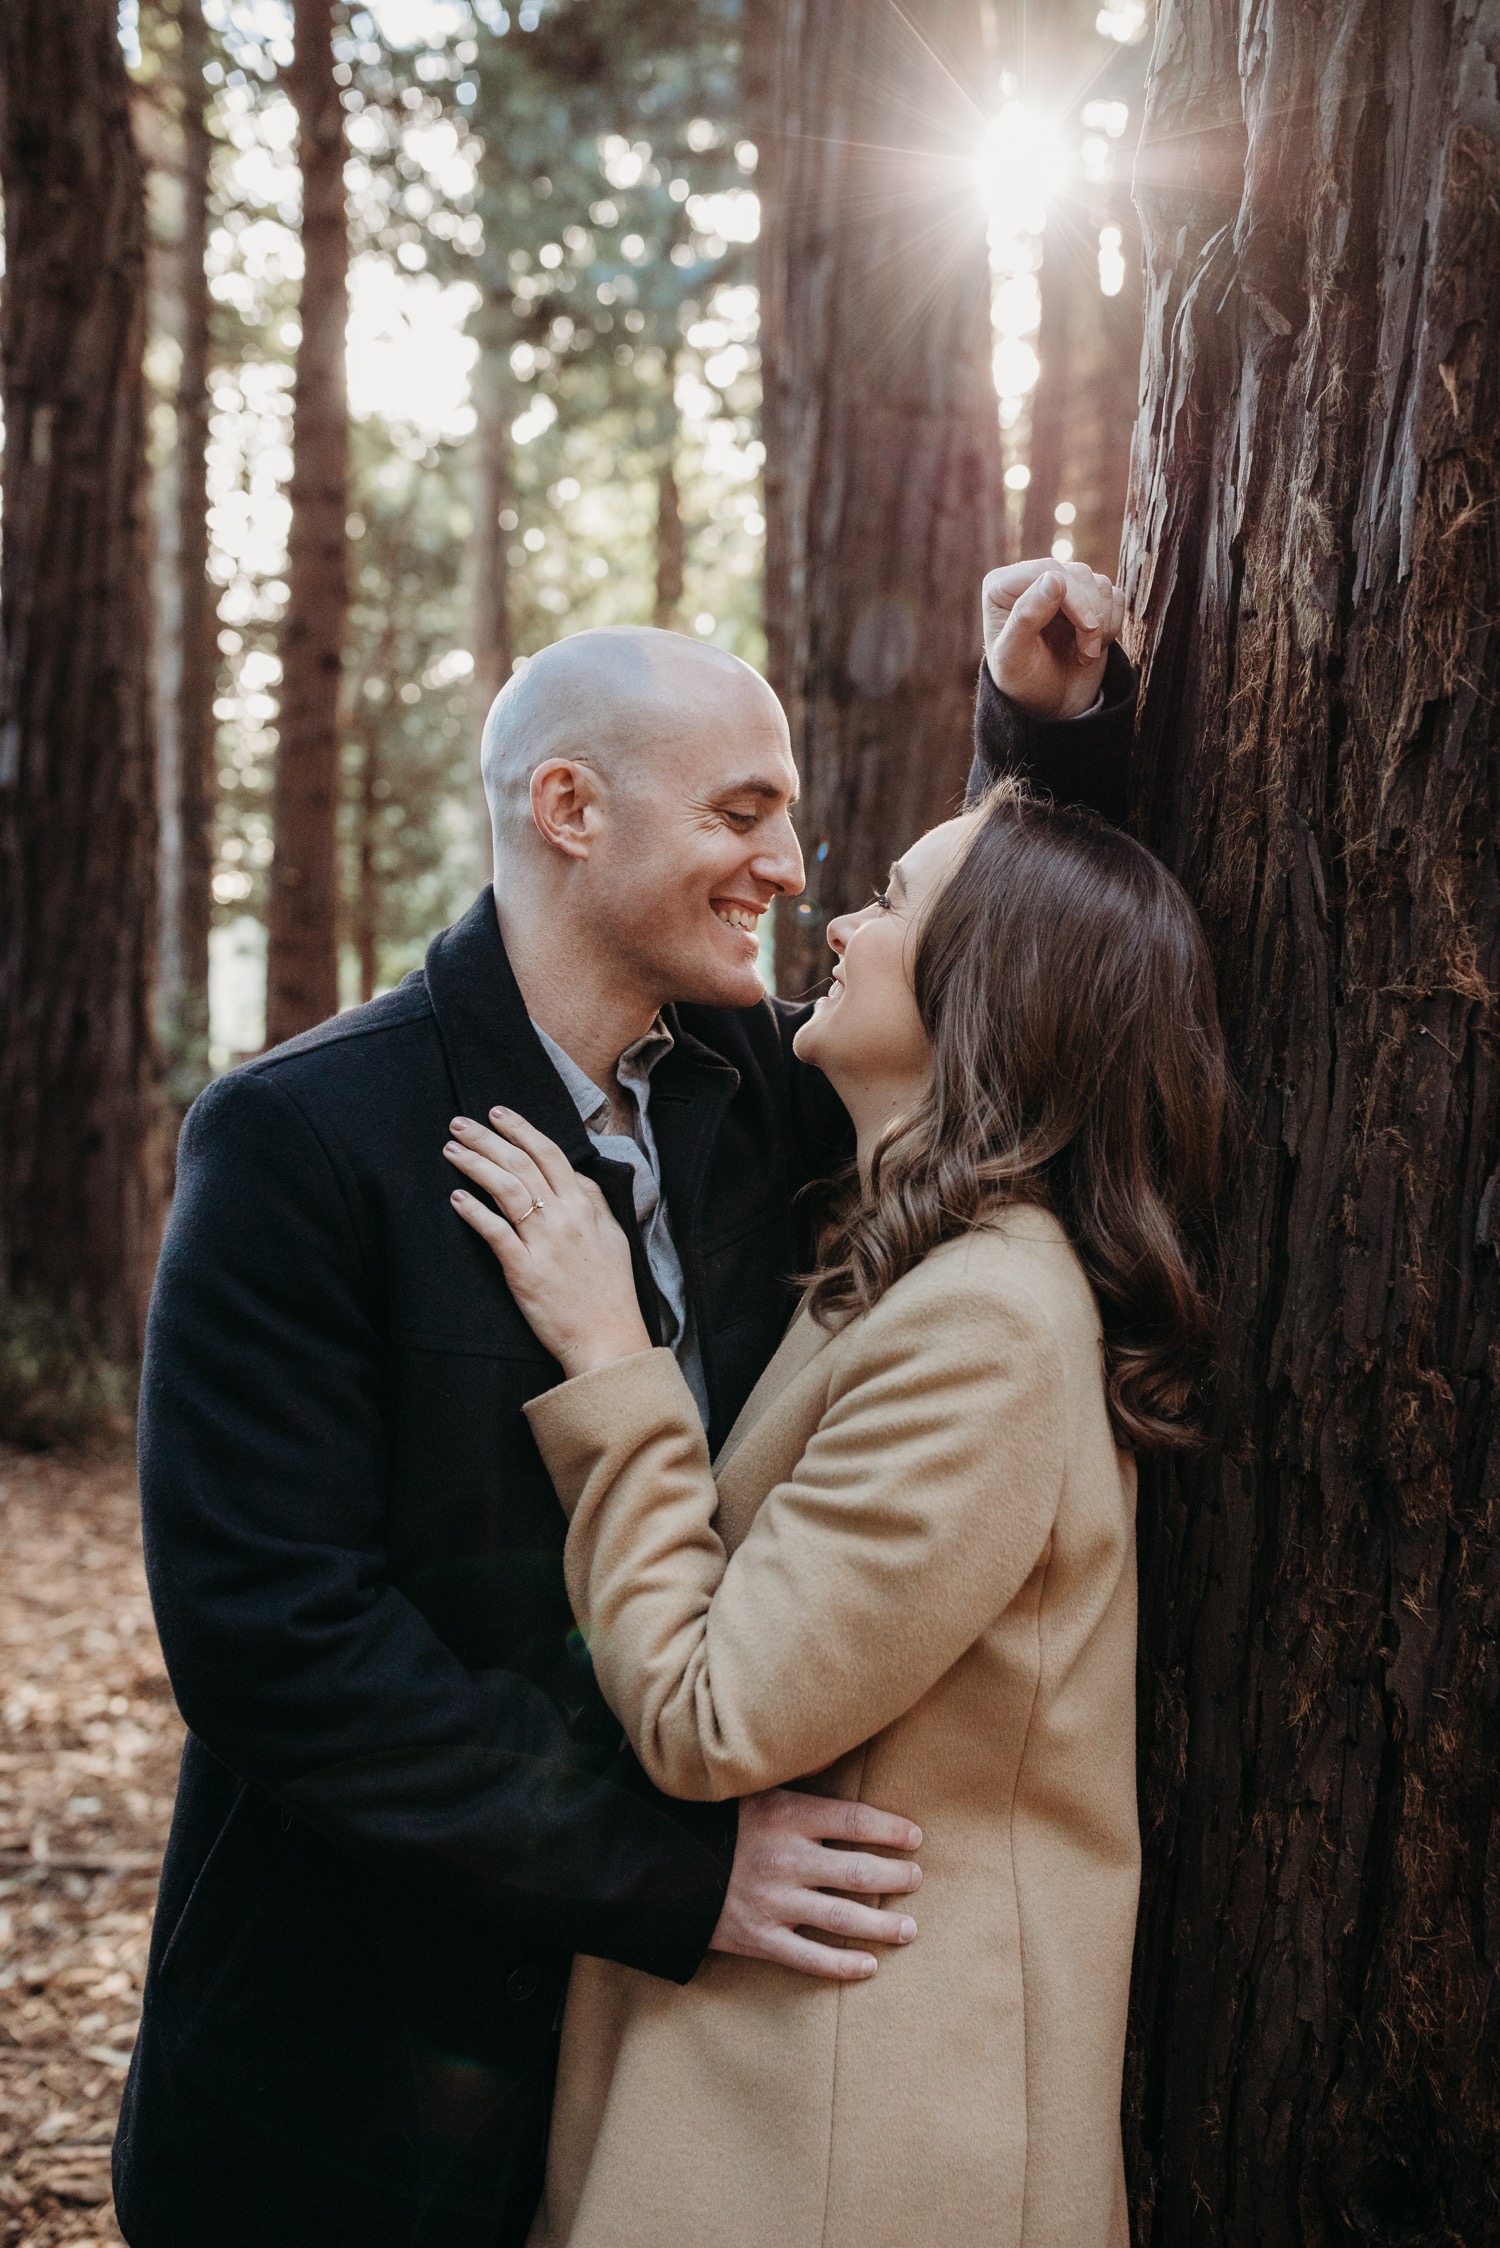 Woman leans against tree as man leans in to kiss her during their redwoods engagement photoshoot in San Francisco.